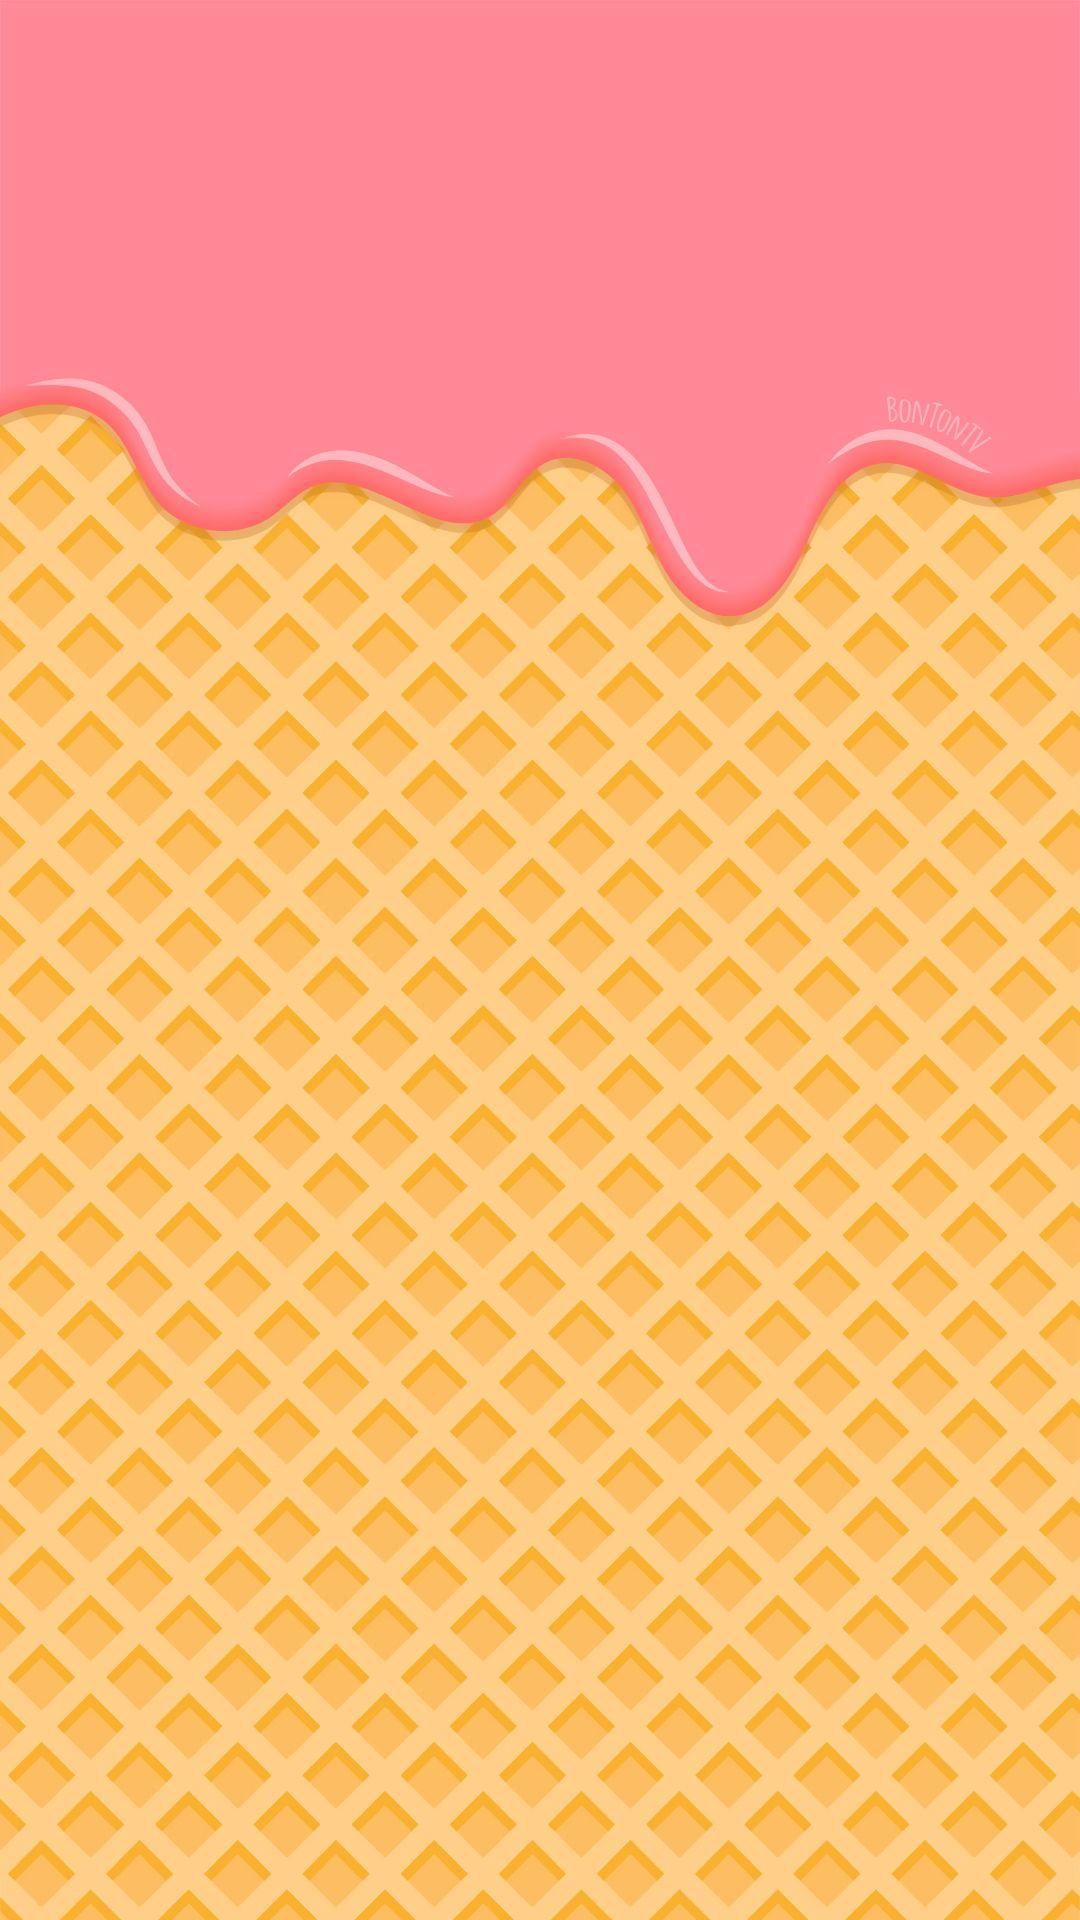 Phone Wallpaper HD Pink Melted Ice Cream on Waffle